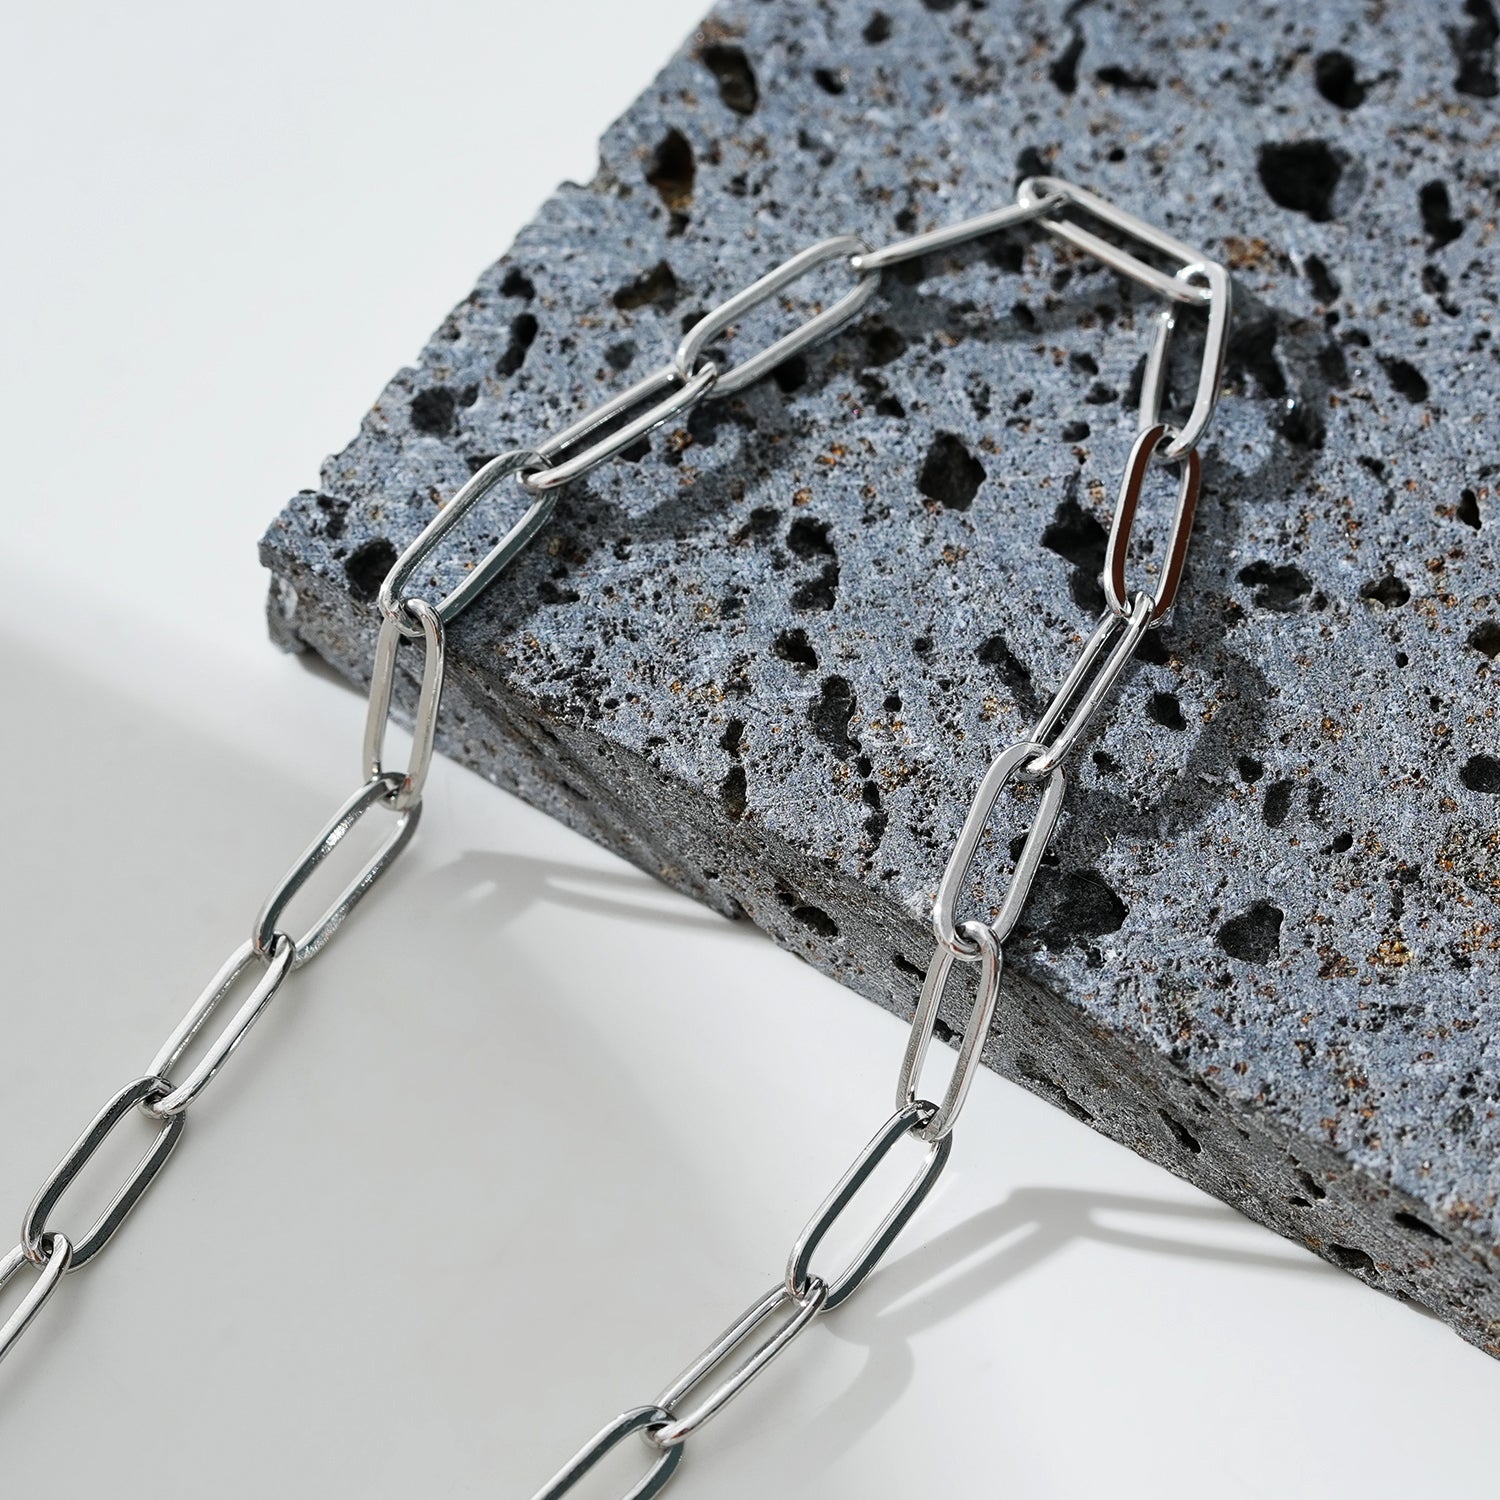 Style HAKILA LG 5800S: Essential Silver Chain Link Paper-Clip Anklet.